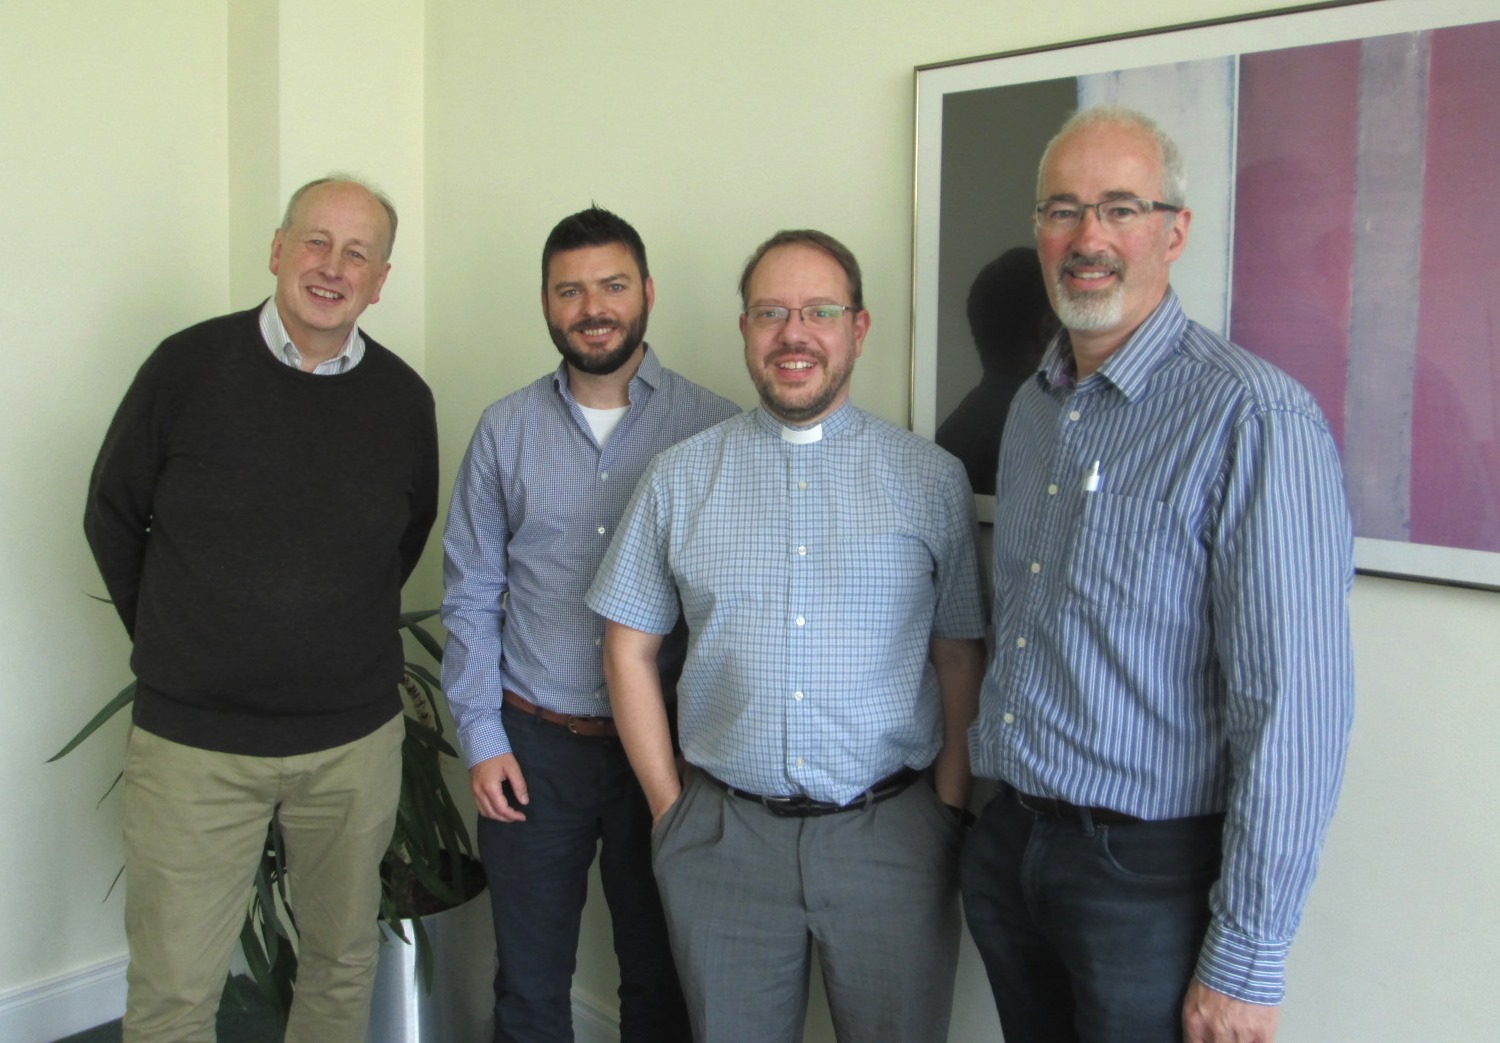 Sam Moore, Director, Innovista Ireland, (second left) with the Council for Mission's officers (from left) Derek Neilson, Treasurer; the Revd Adam Pullen, Chairman; and the Revd Cliff Jeffers, Secretary.